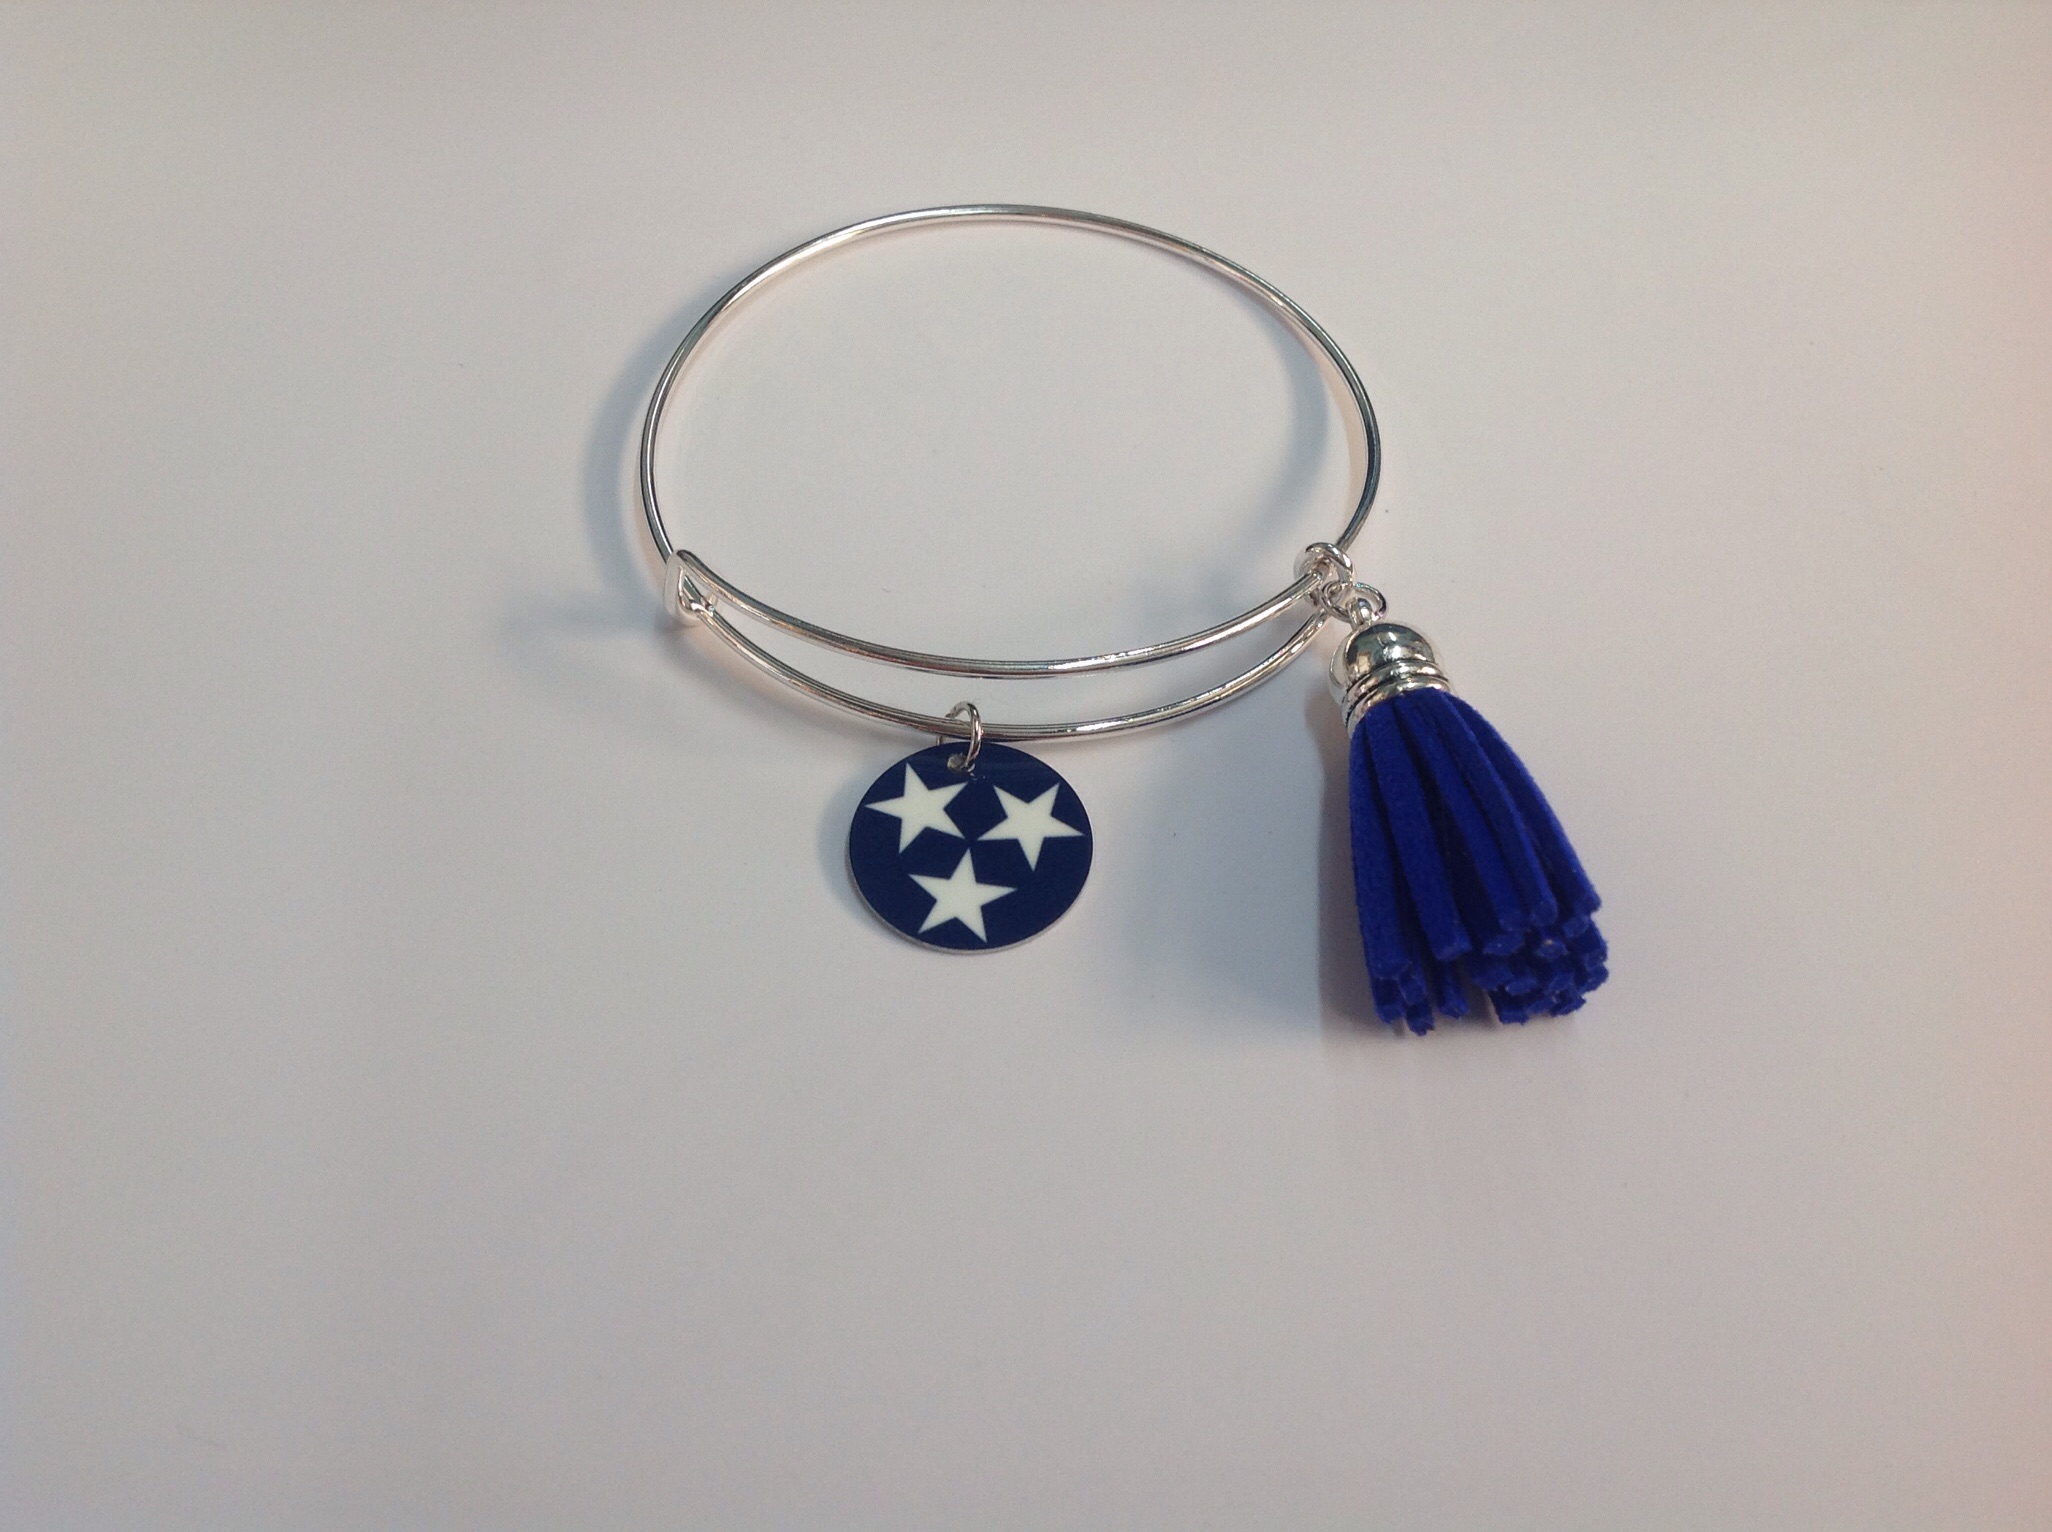 Tennessee Tri Star Charm Bracelet made with sublimation printing